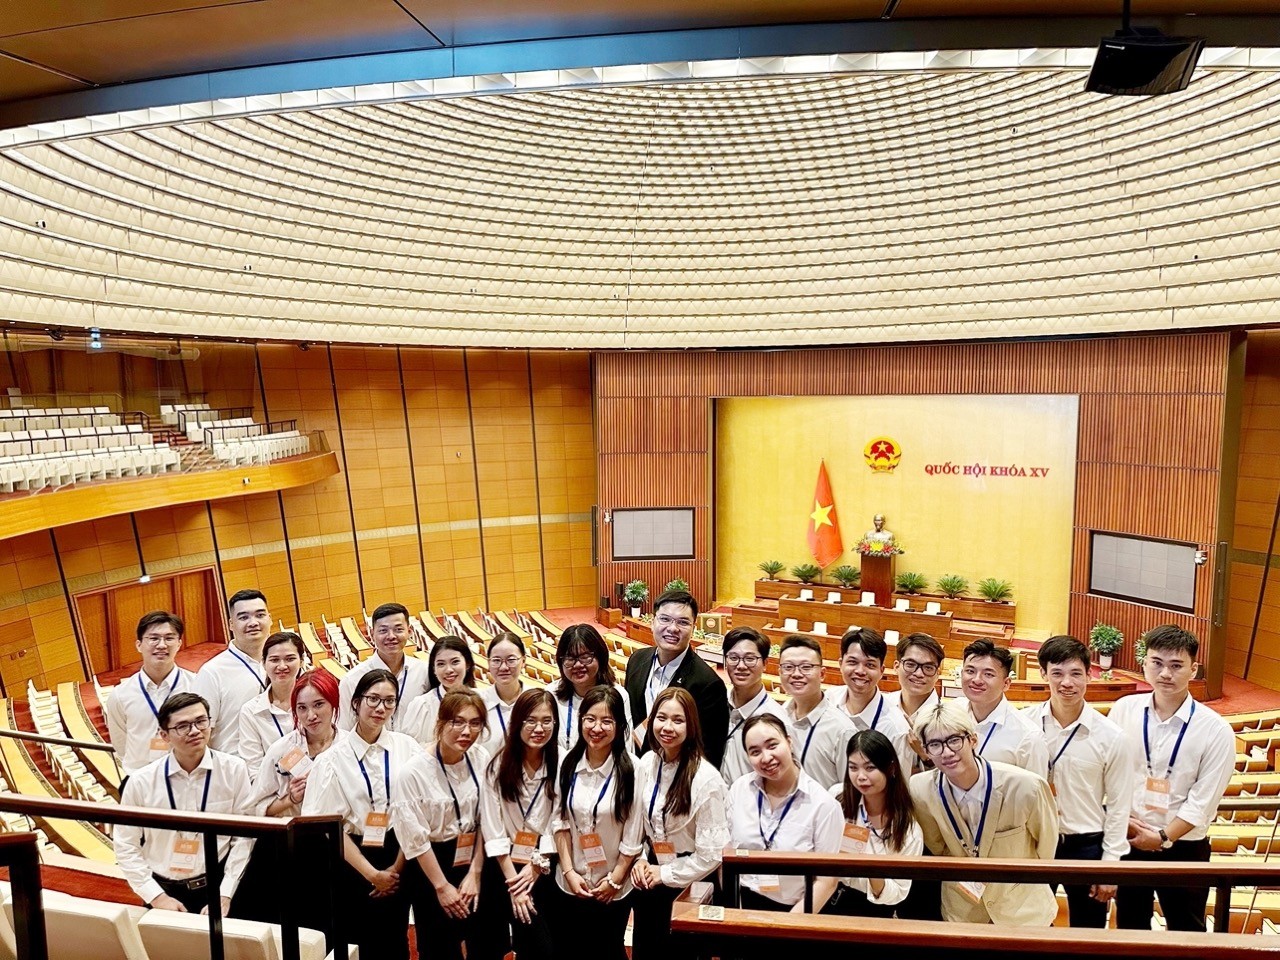 Vietnamese Students in Russia: Emotional Tour to the Vietnam's National Assembly Building